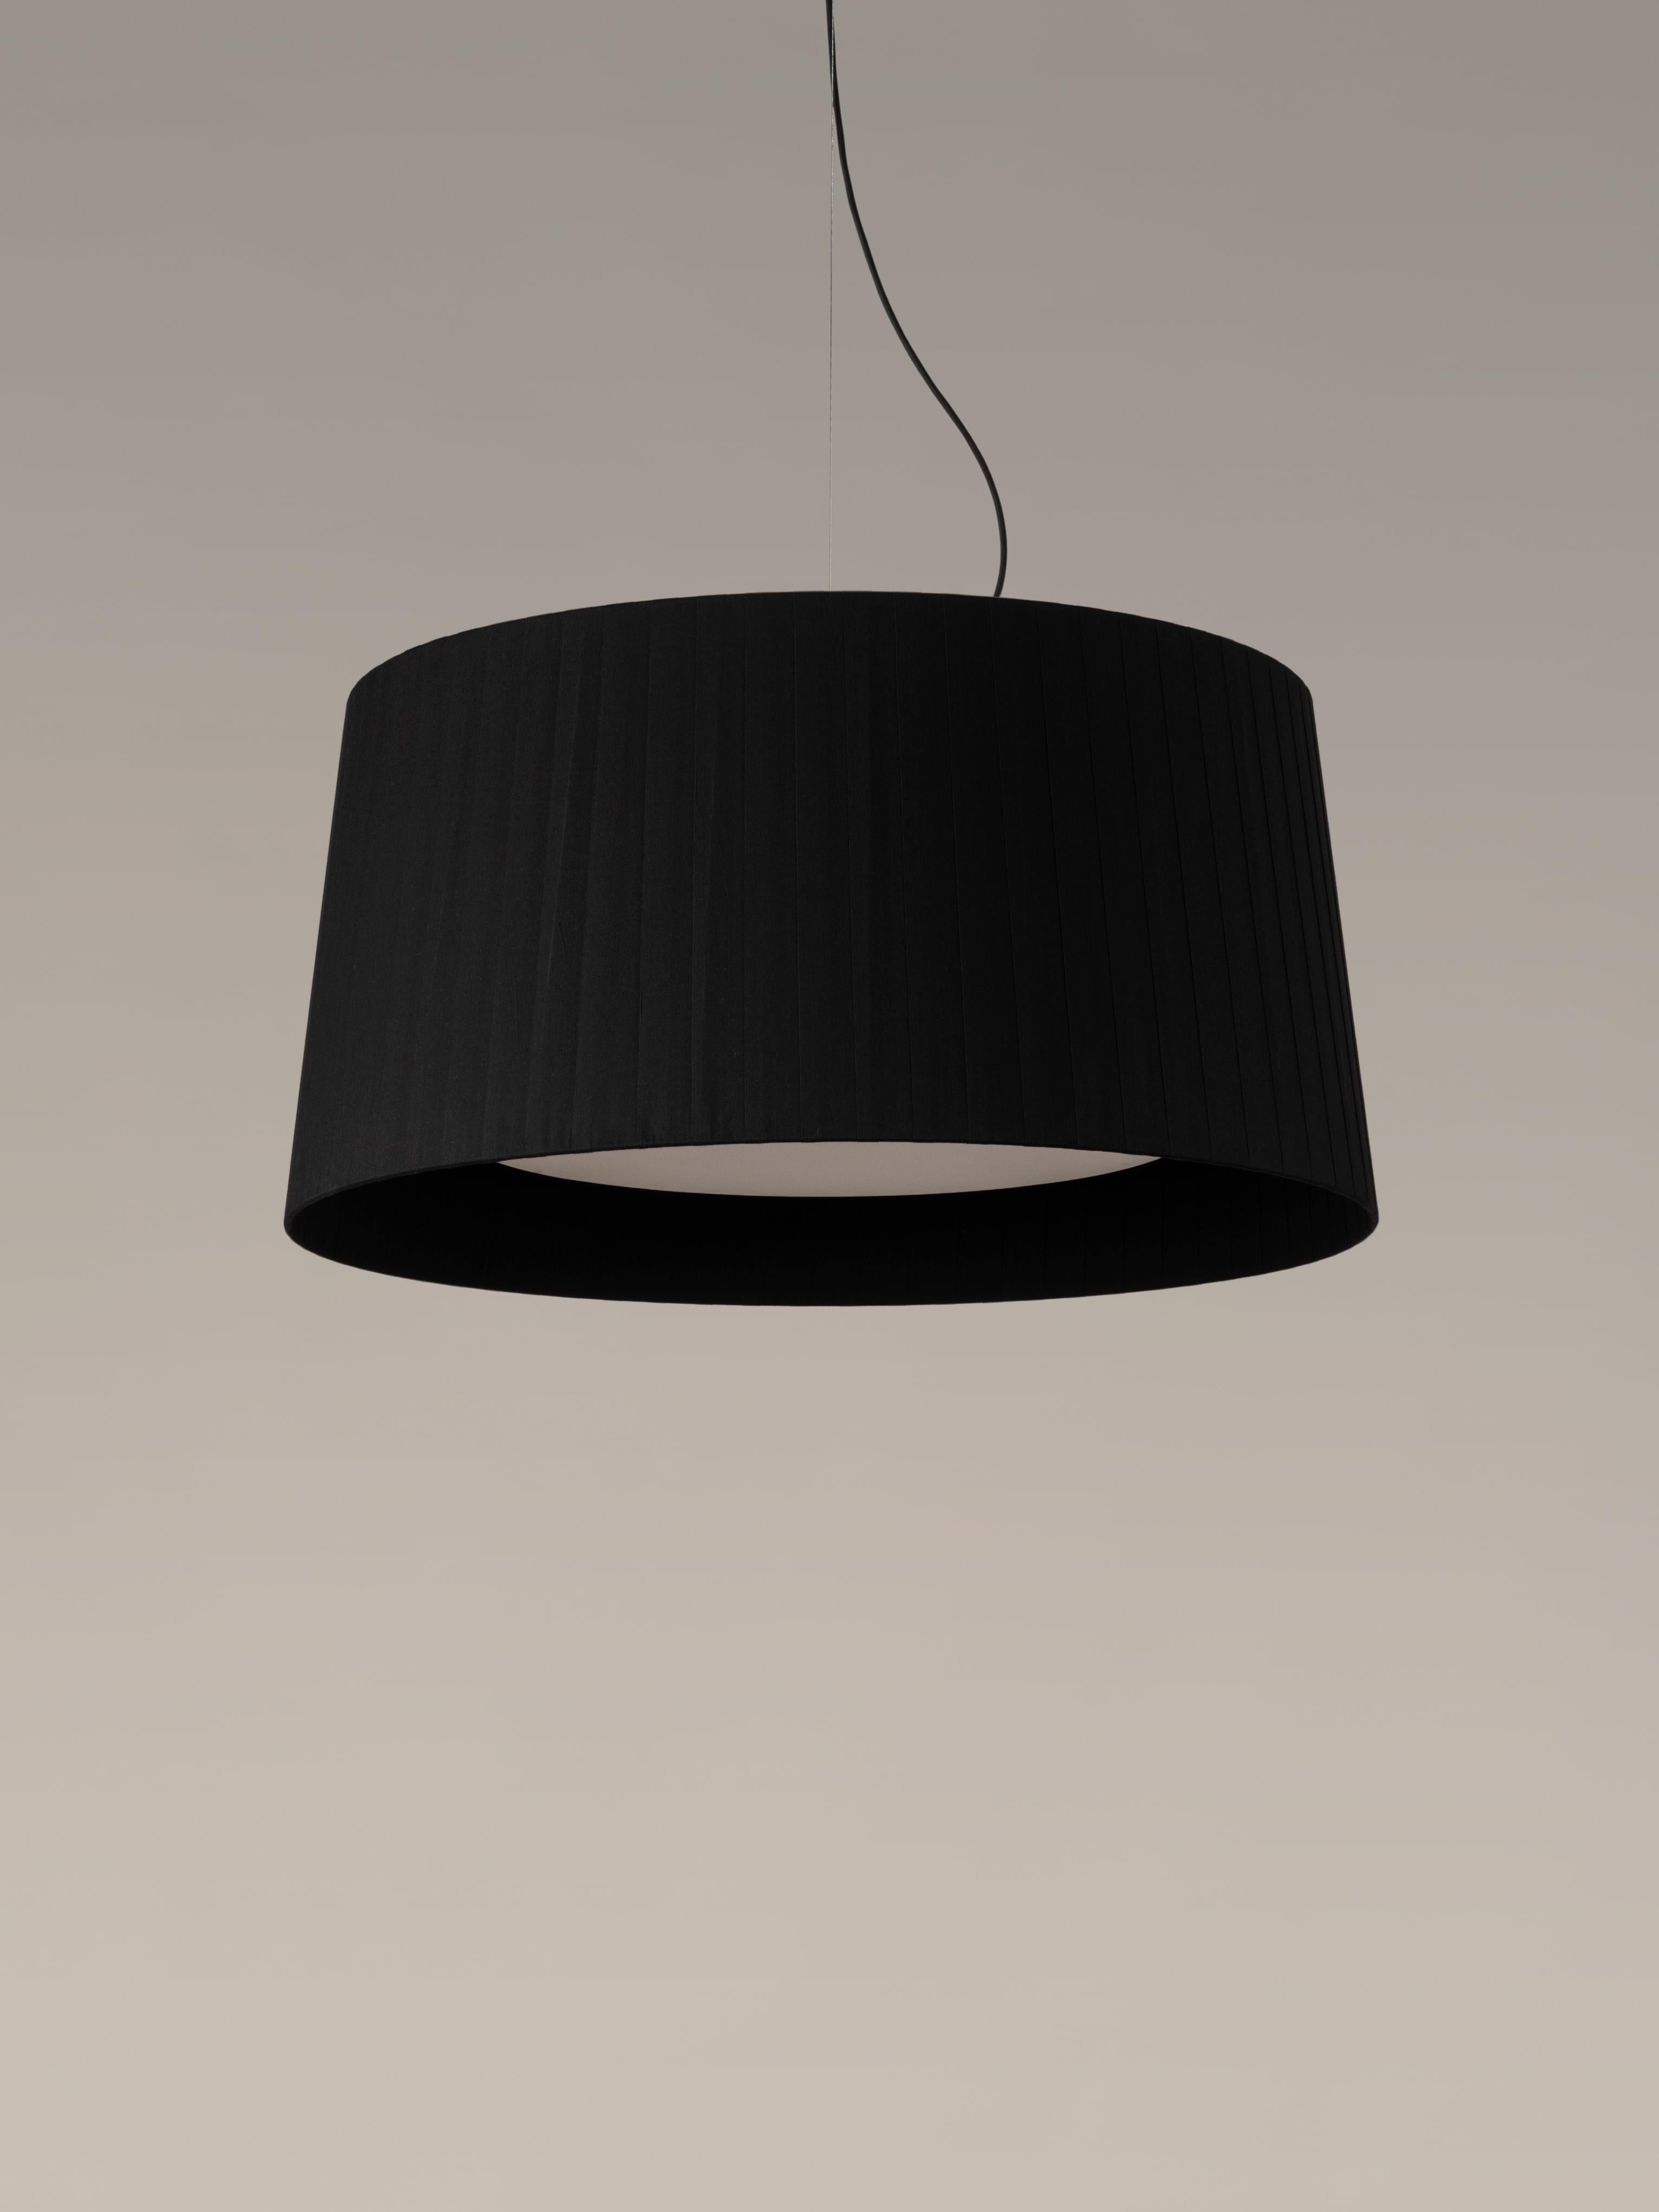 Black GT7 pendant lamp by Santa & Cole.
Dimensions: d 90 x h 44 cm.
Materials: metal, ribbon.
Available in other colors.

Designed for intermediate volumes and domestic areas, GT7 is larger, requiring a reinforced structure that adds a metal